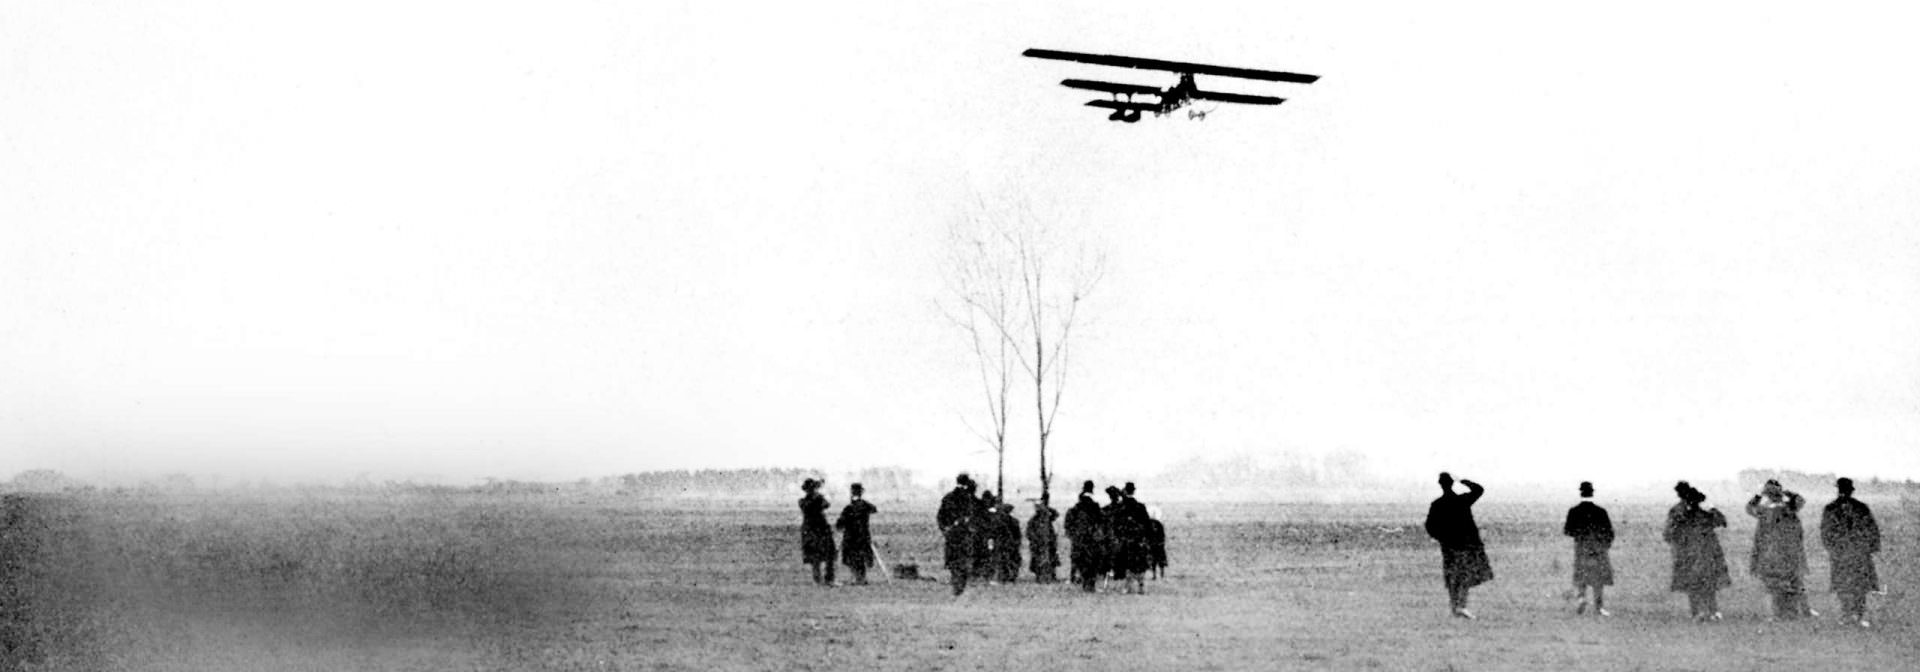 Historic black and white photograph showing a BMW biplane flying low over a field with a group of people watching from the ground.